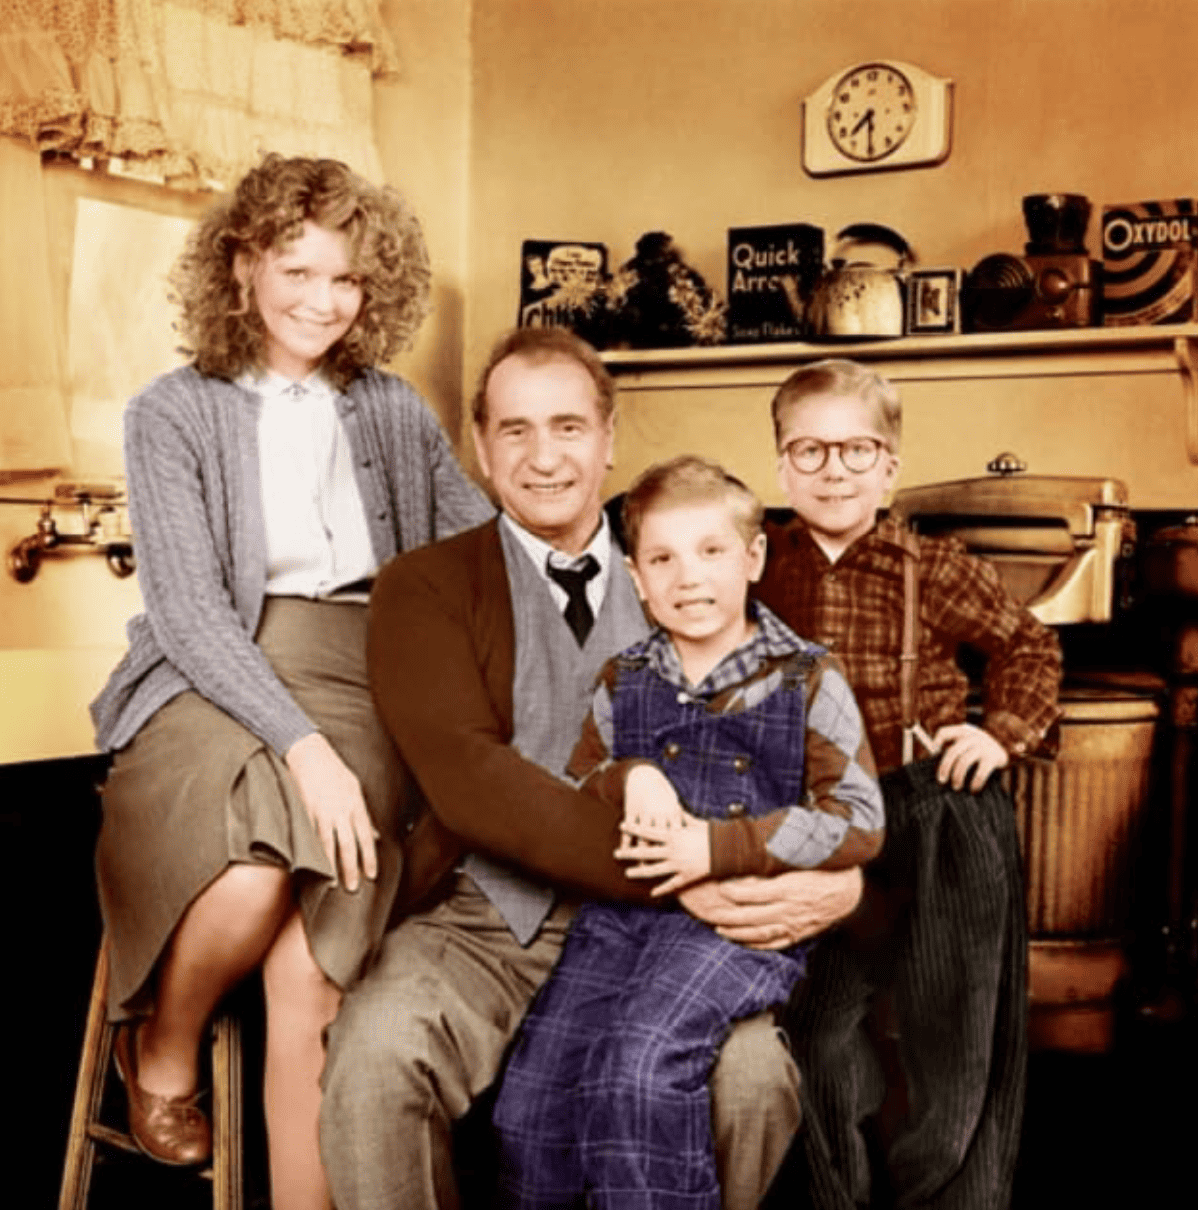 A family poses for a portrait together in this image from Metro-Goldwyn-Mayer.